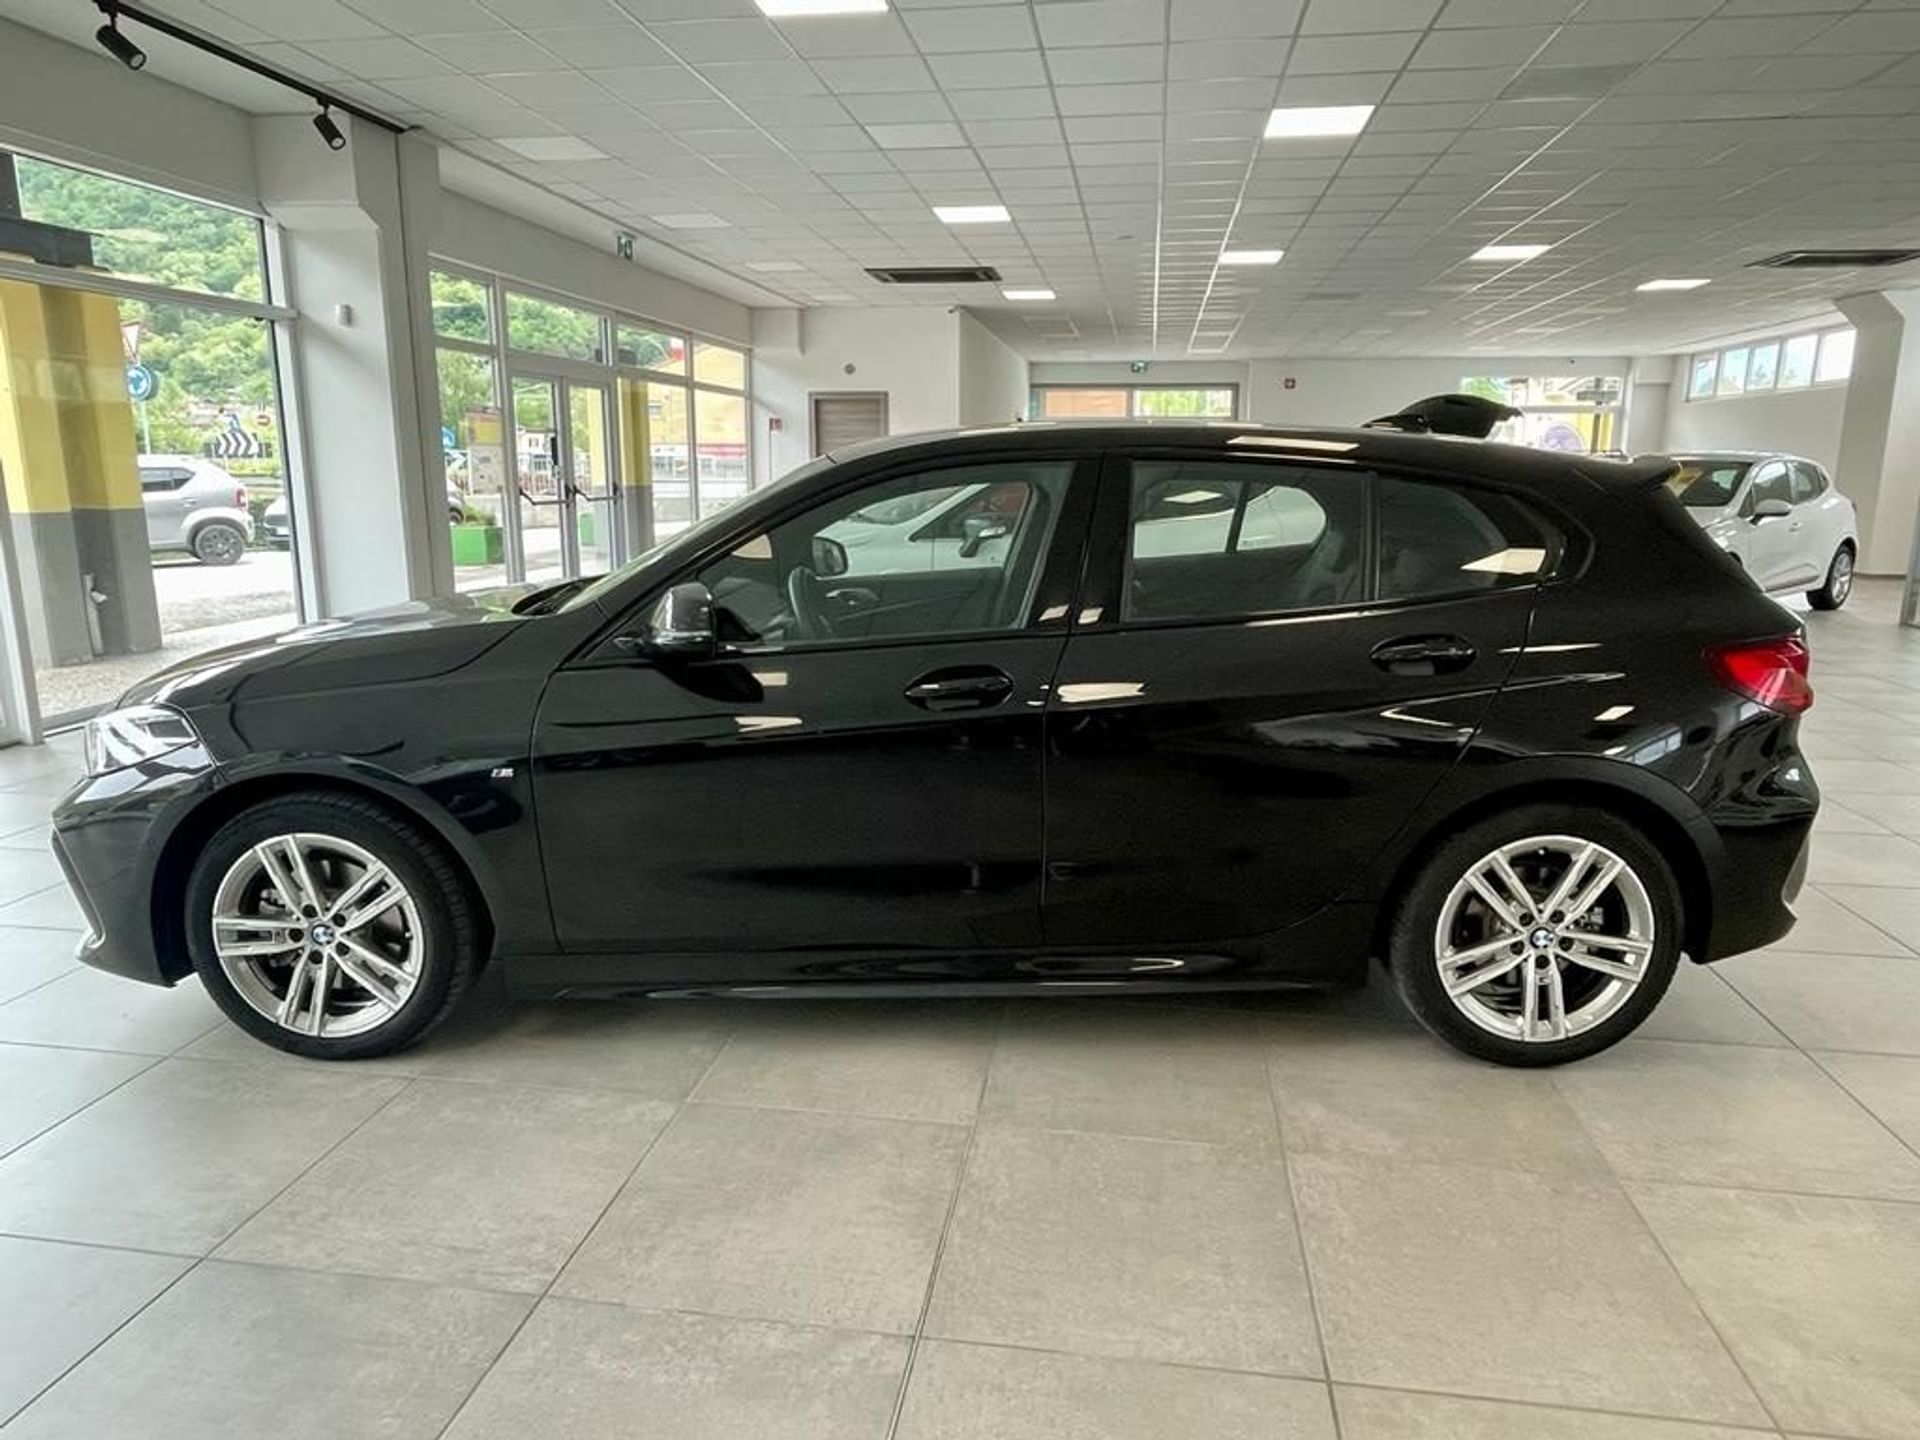 BMW 118d - Laterale sinistro